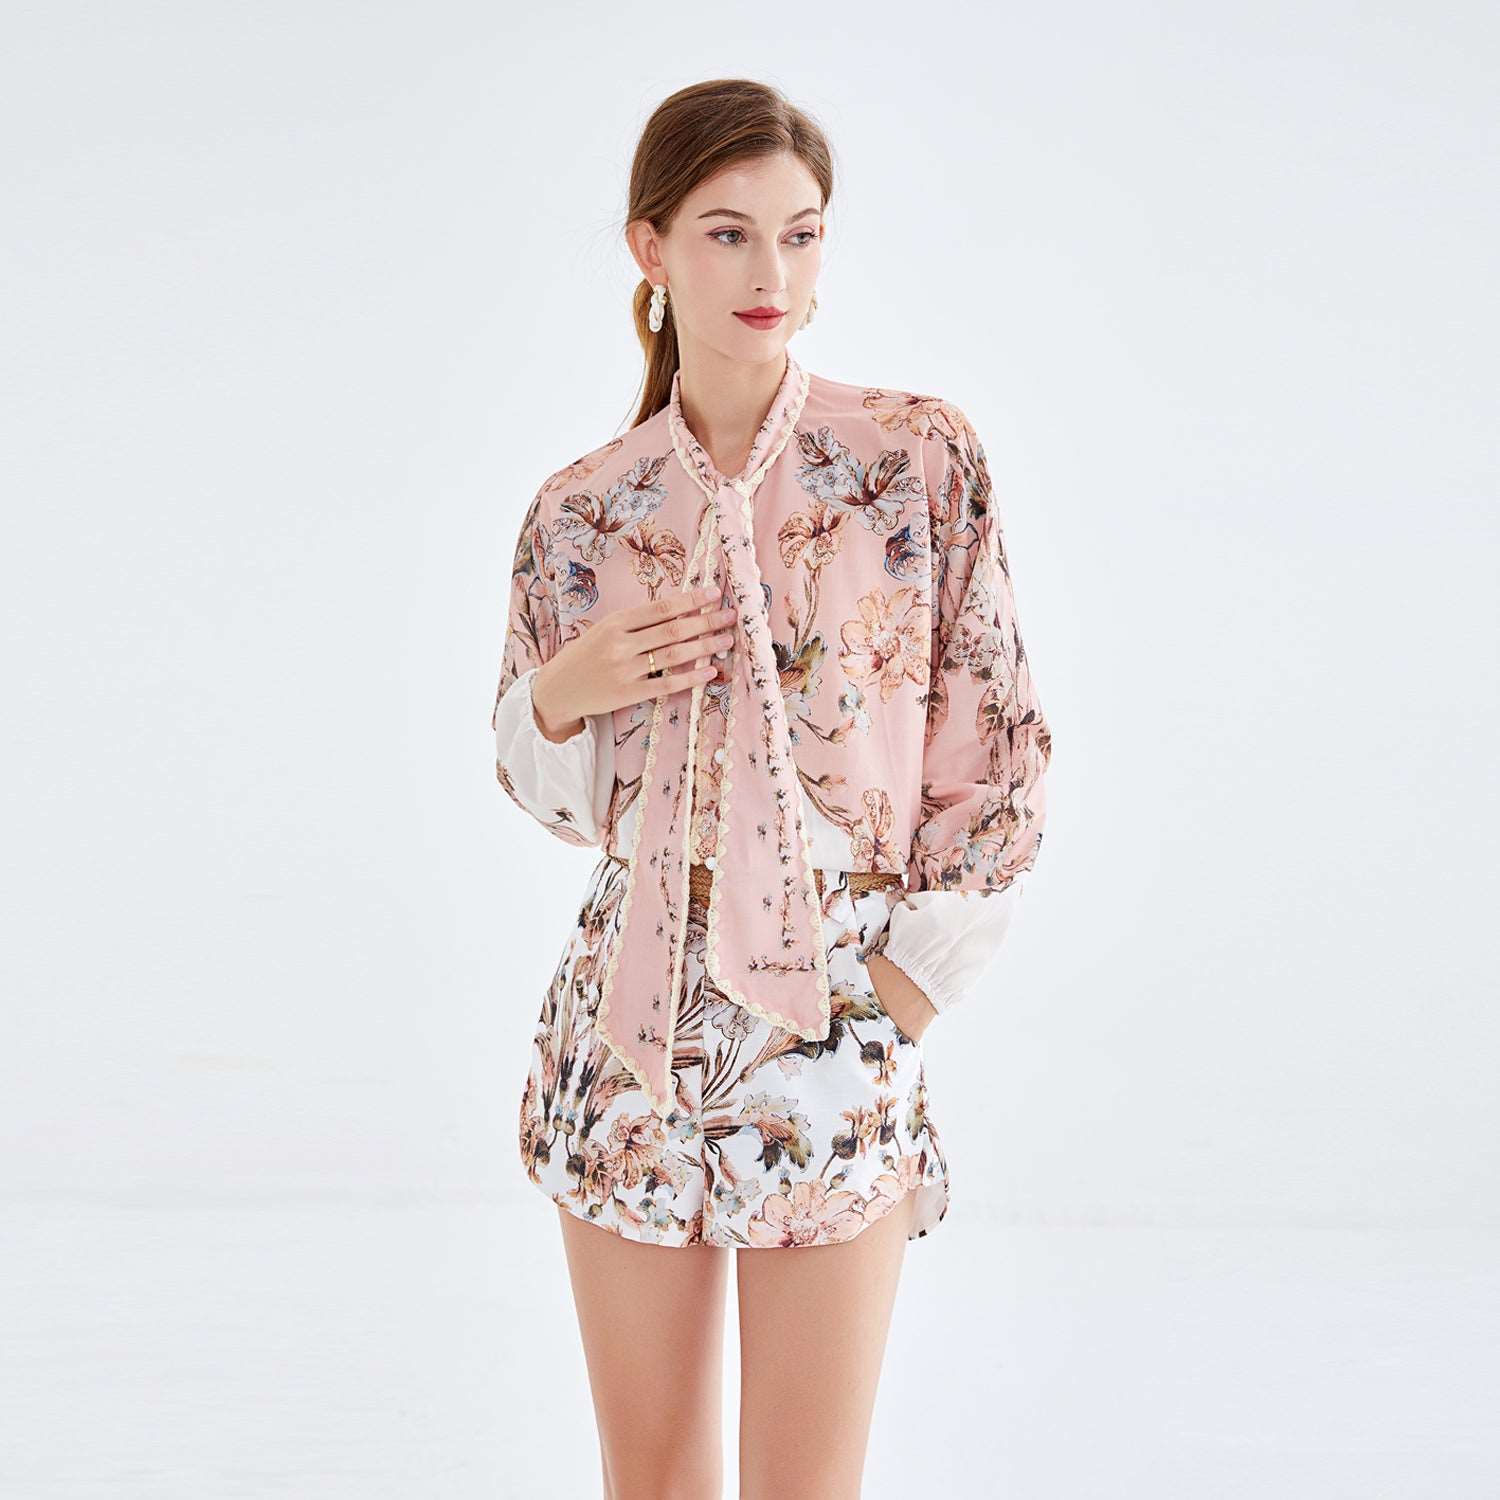 Lace-Up Cotton Linen Lace Shirt & Single-Breasted Shorts Set